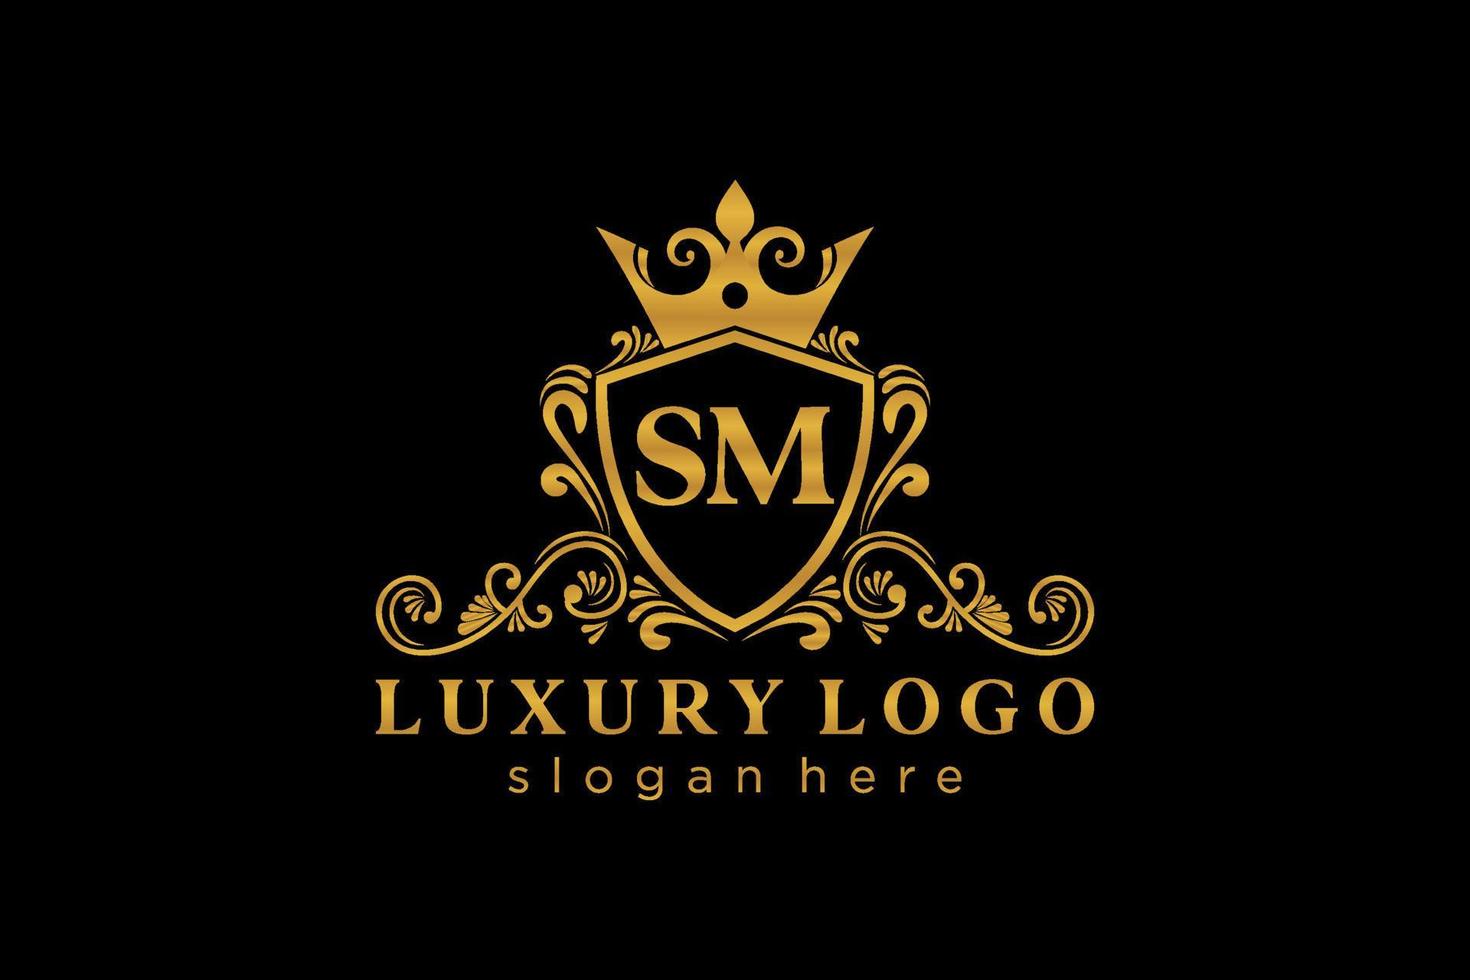 Initial SM Letter Royal Luxury Logo template in vector art for Restaurant, Royalty, Boutique, Cafe, Hotel, Heraldic, Jewelry, Fashion and other vector illustration.